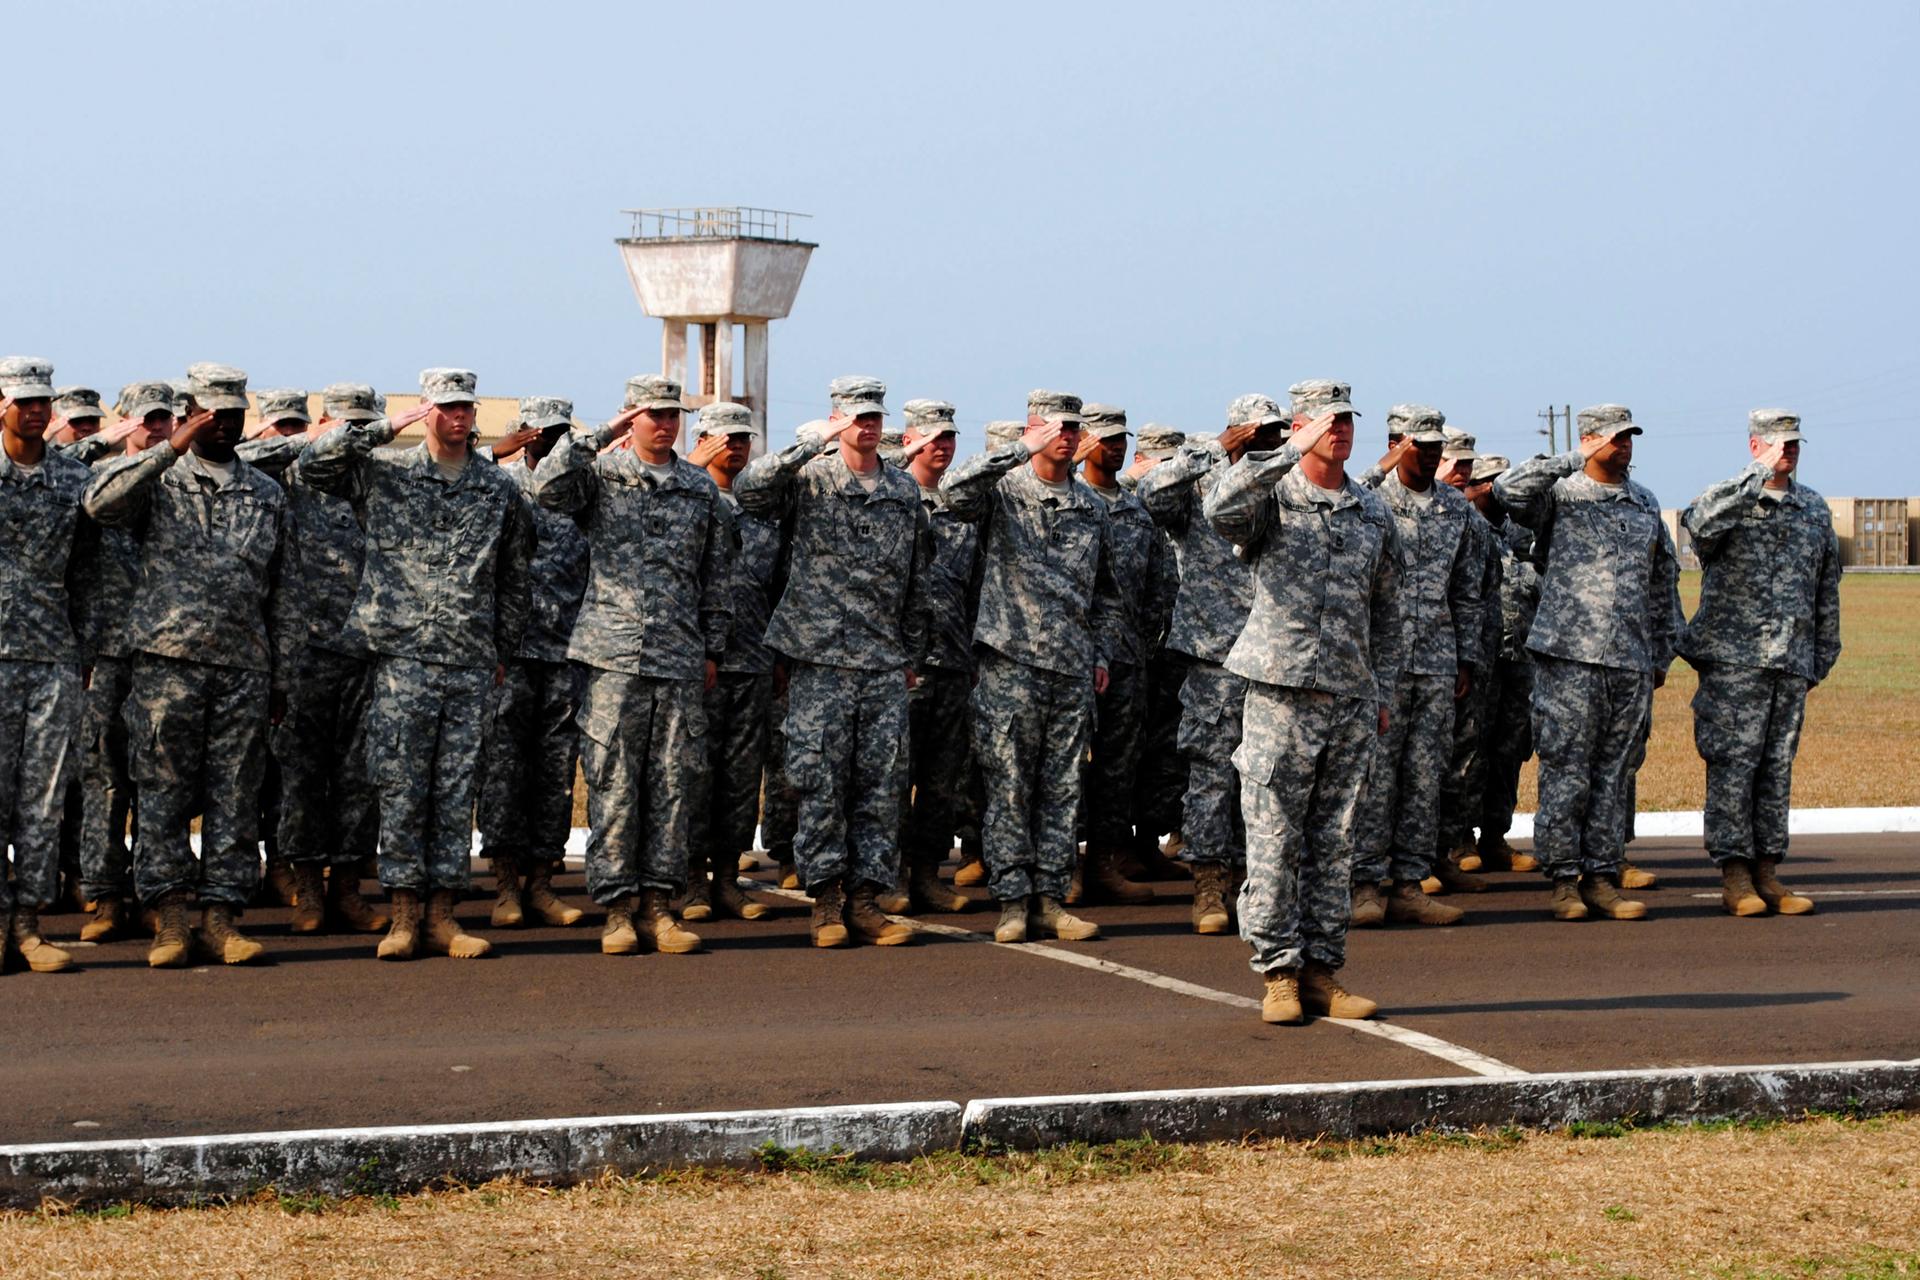 American soldiers take part in a ceremony marking the end of their mission to fight Ebola in Monrovia, Liberia, on February 26, 2015.